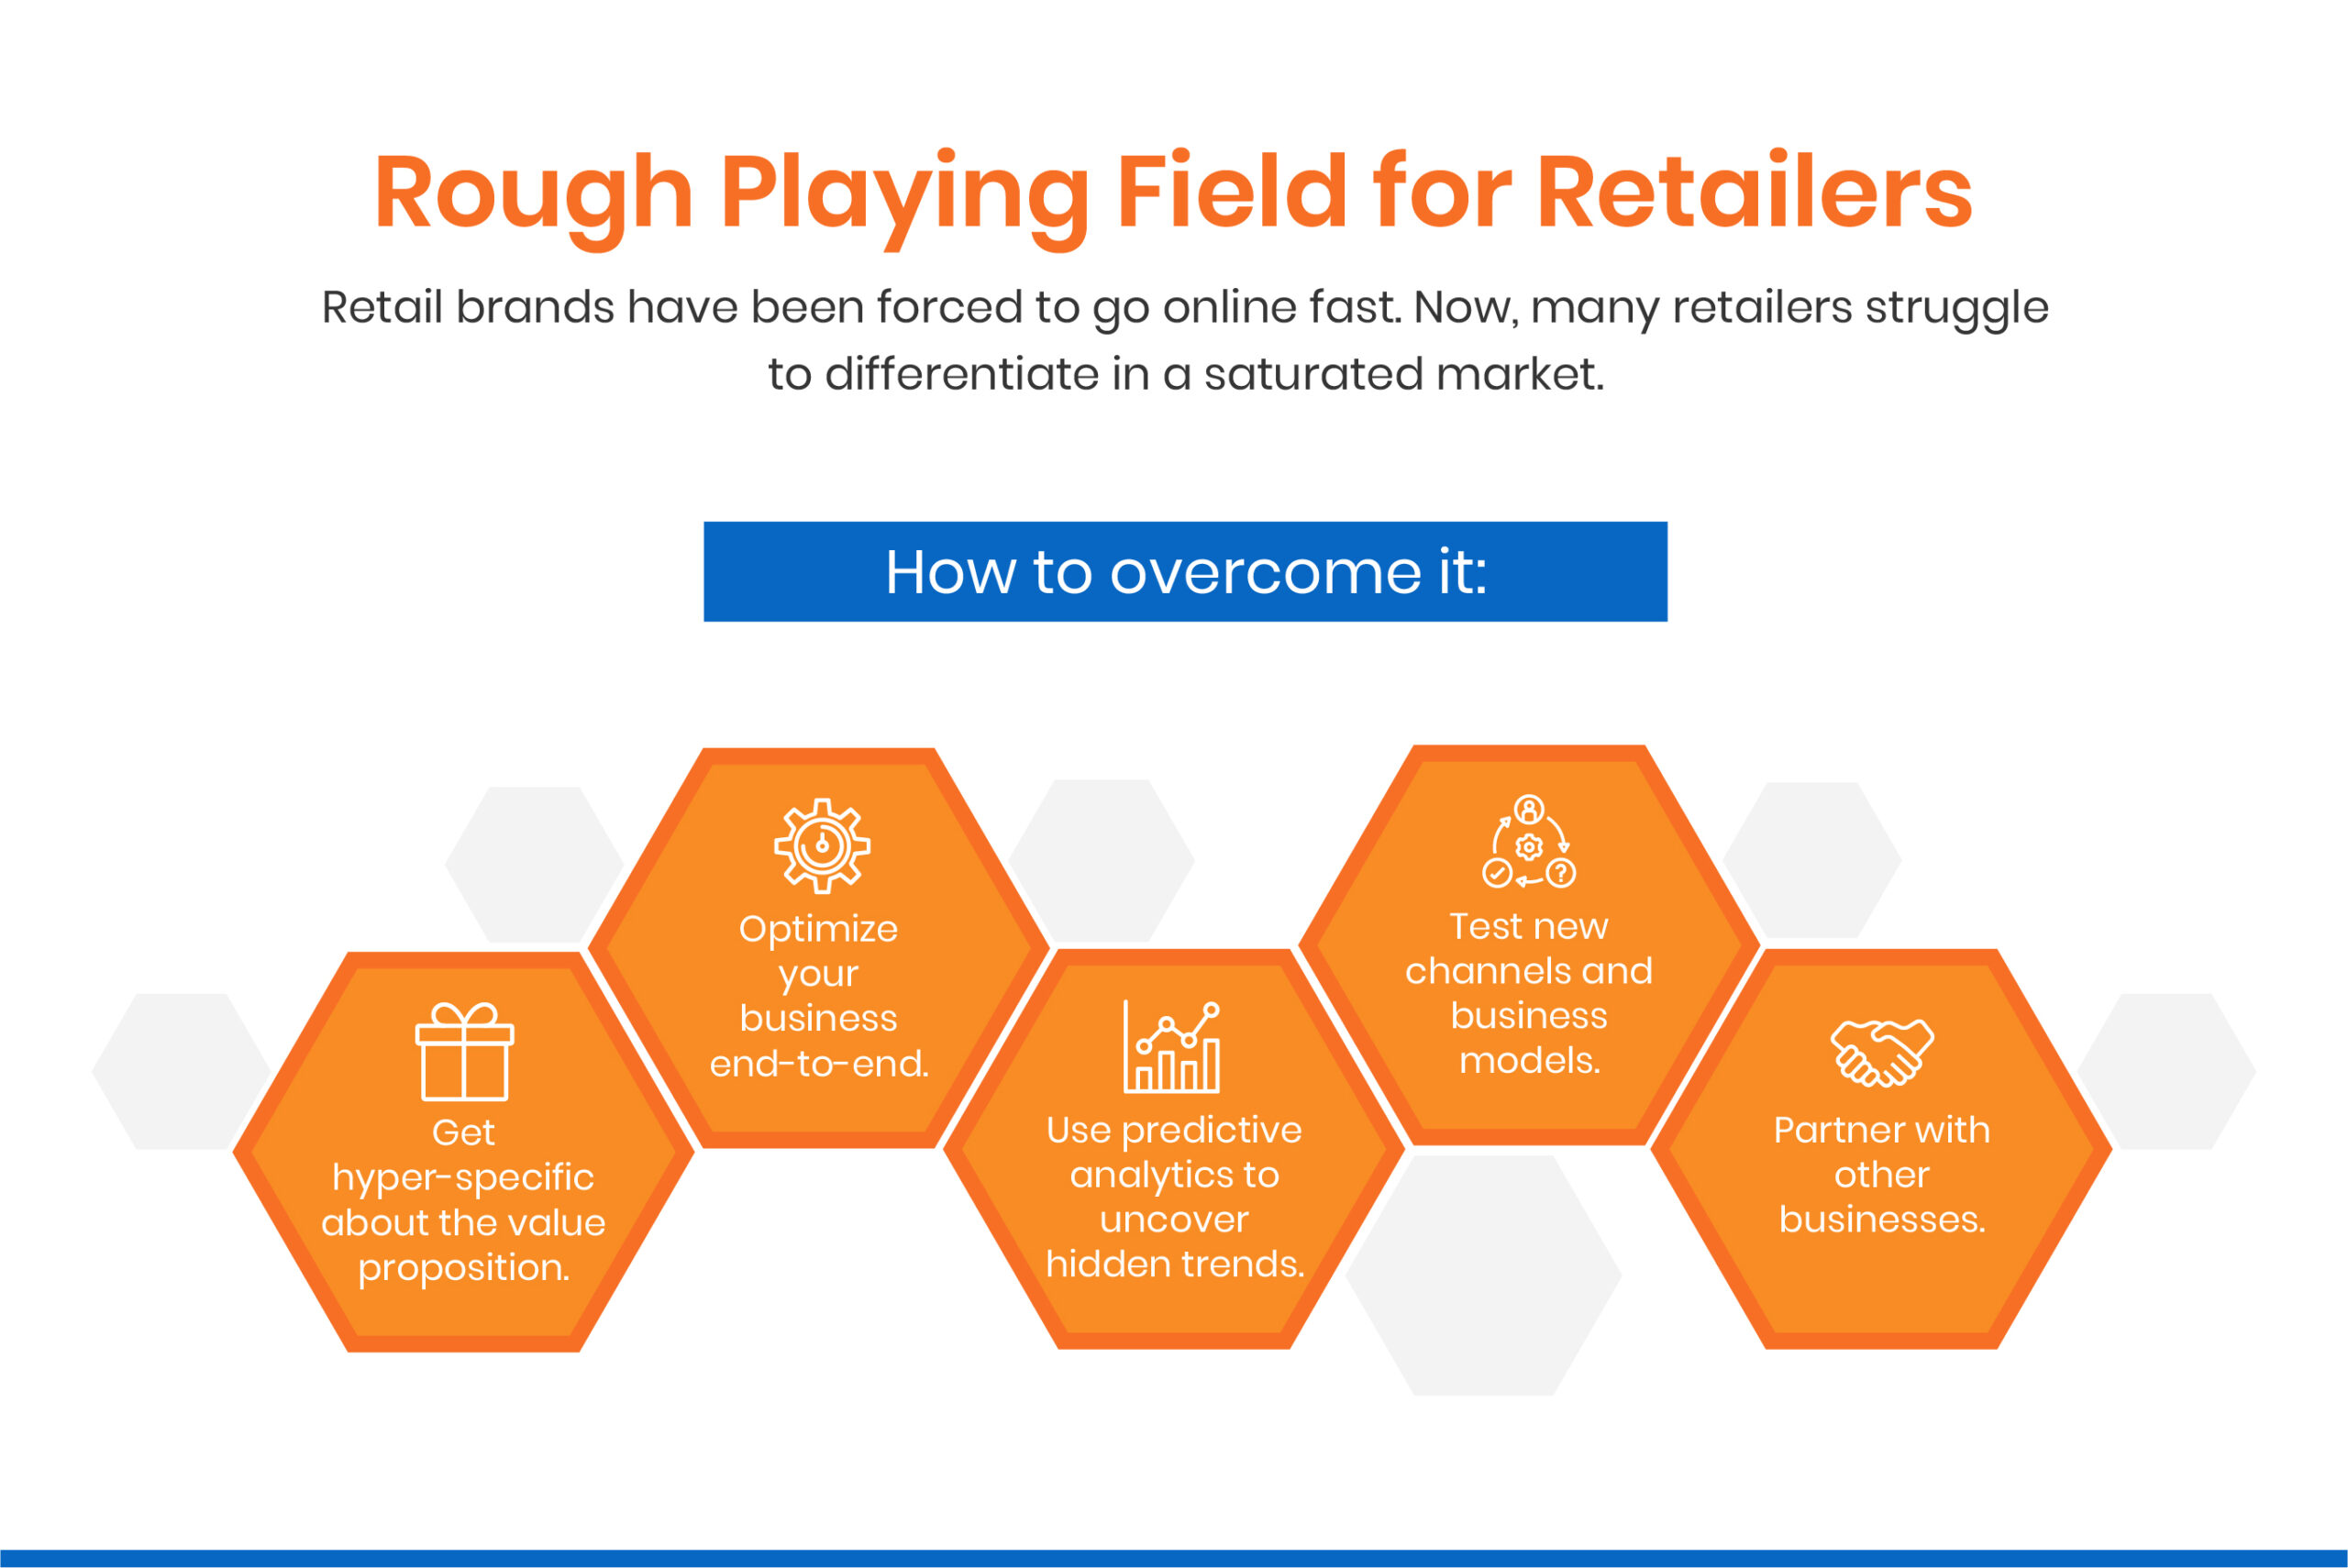 Challenge 2: Rough Playing Field for Retailers